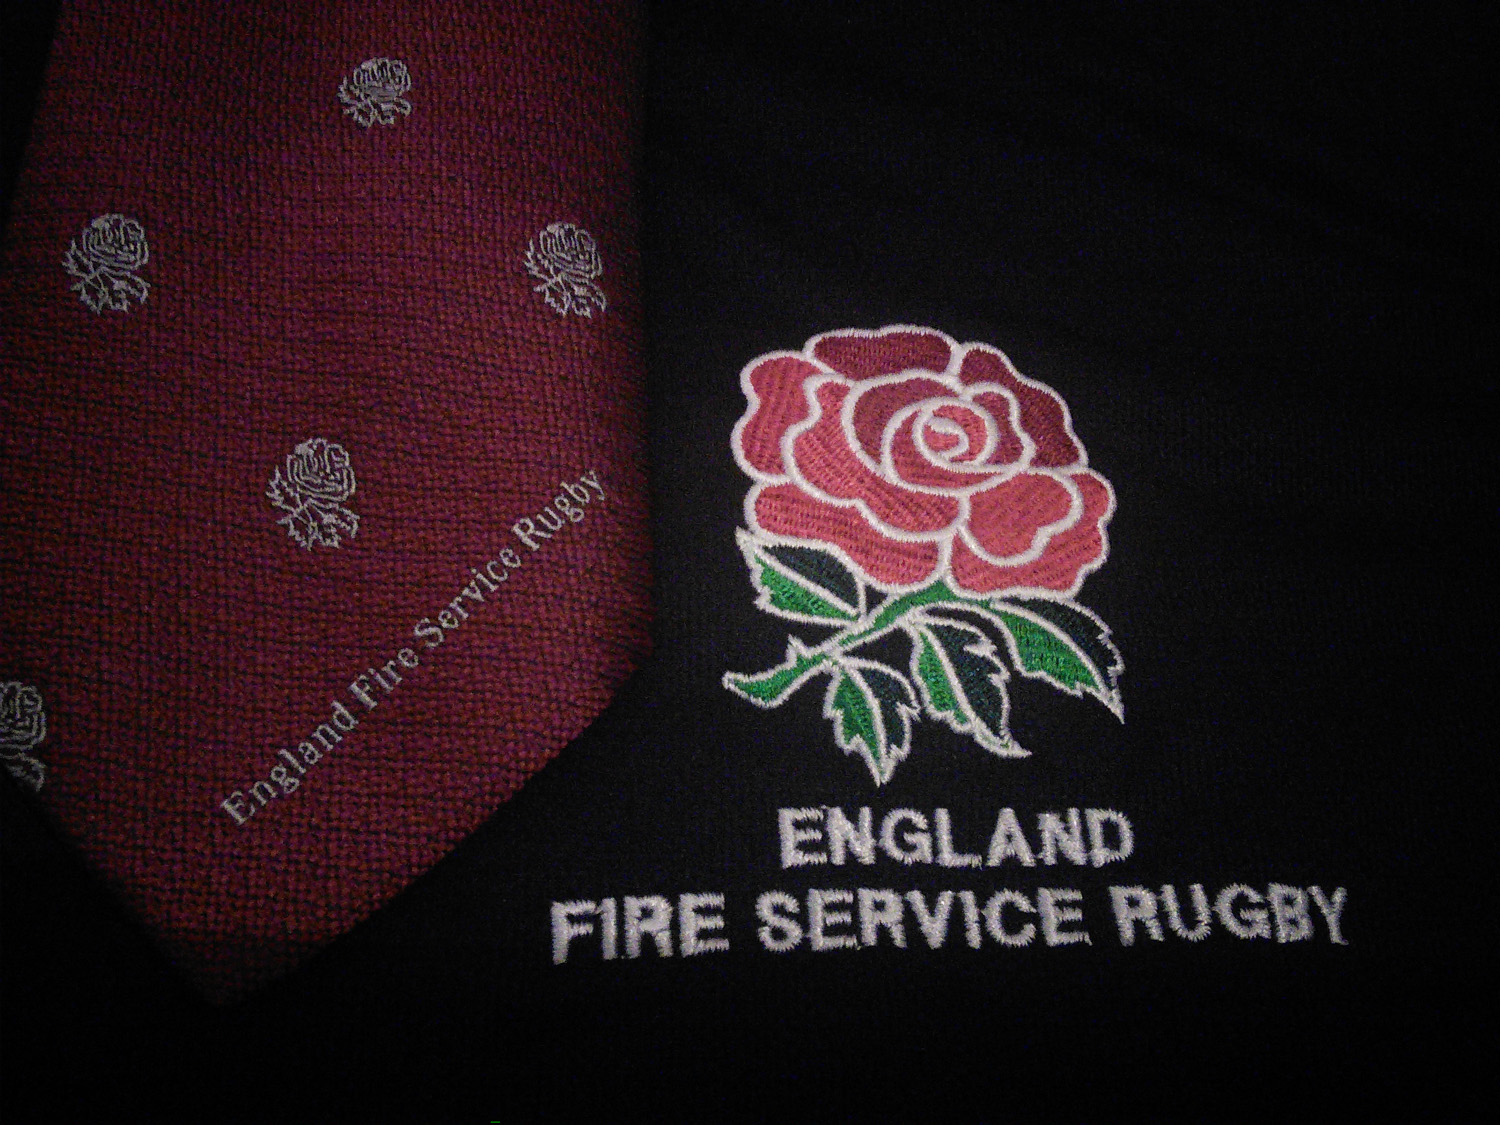 The England Fire Service rugby shirt logo